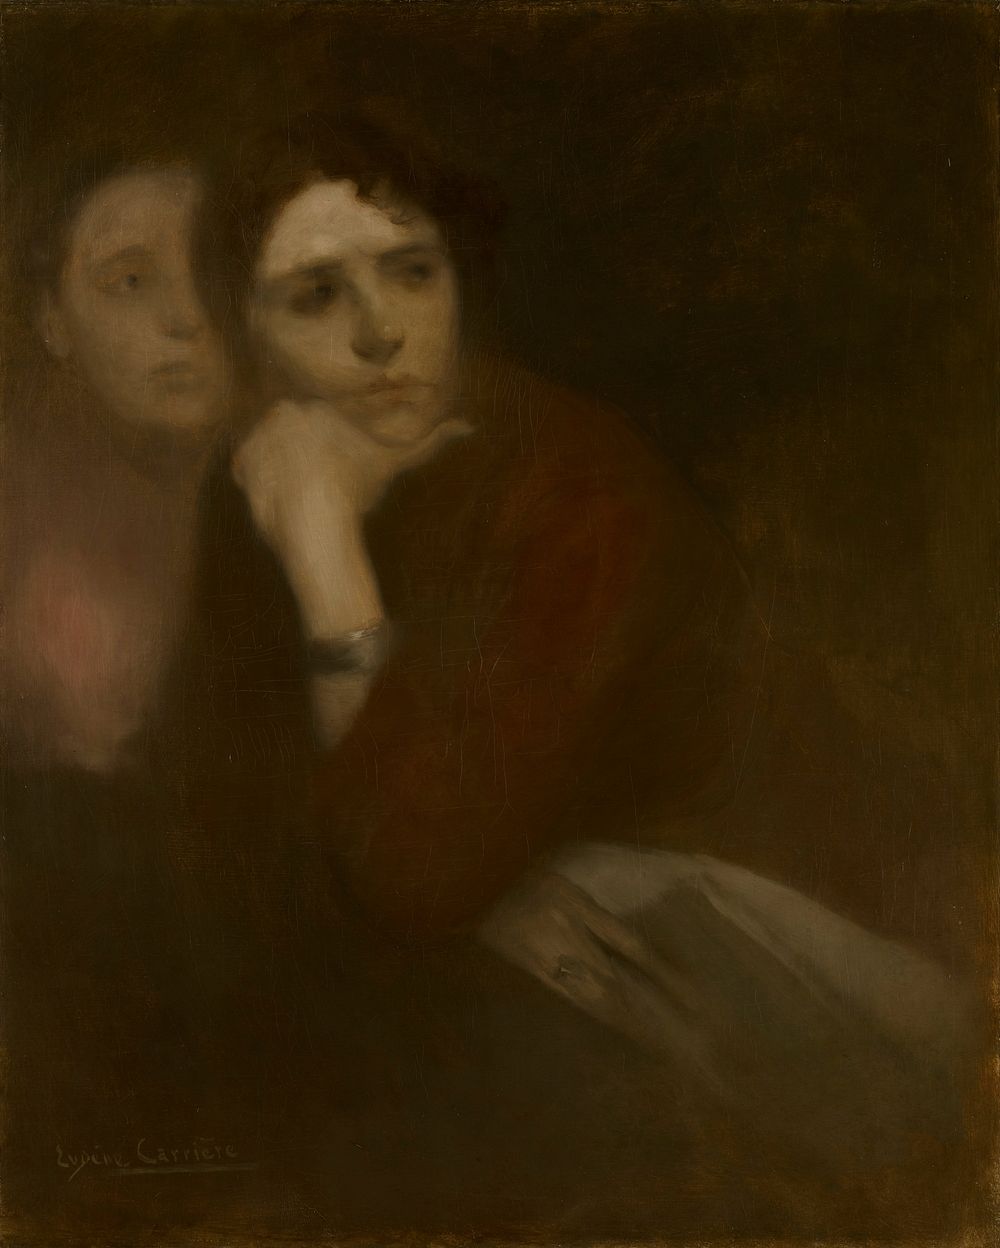 Two Women. Original from the Minneapolis Institute of Art.